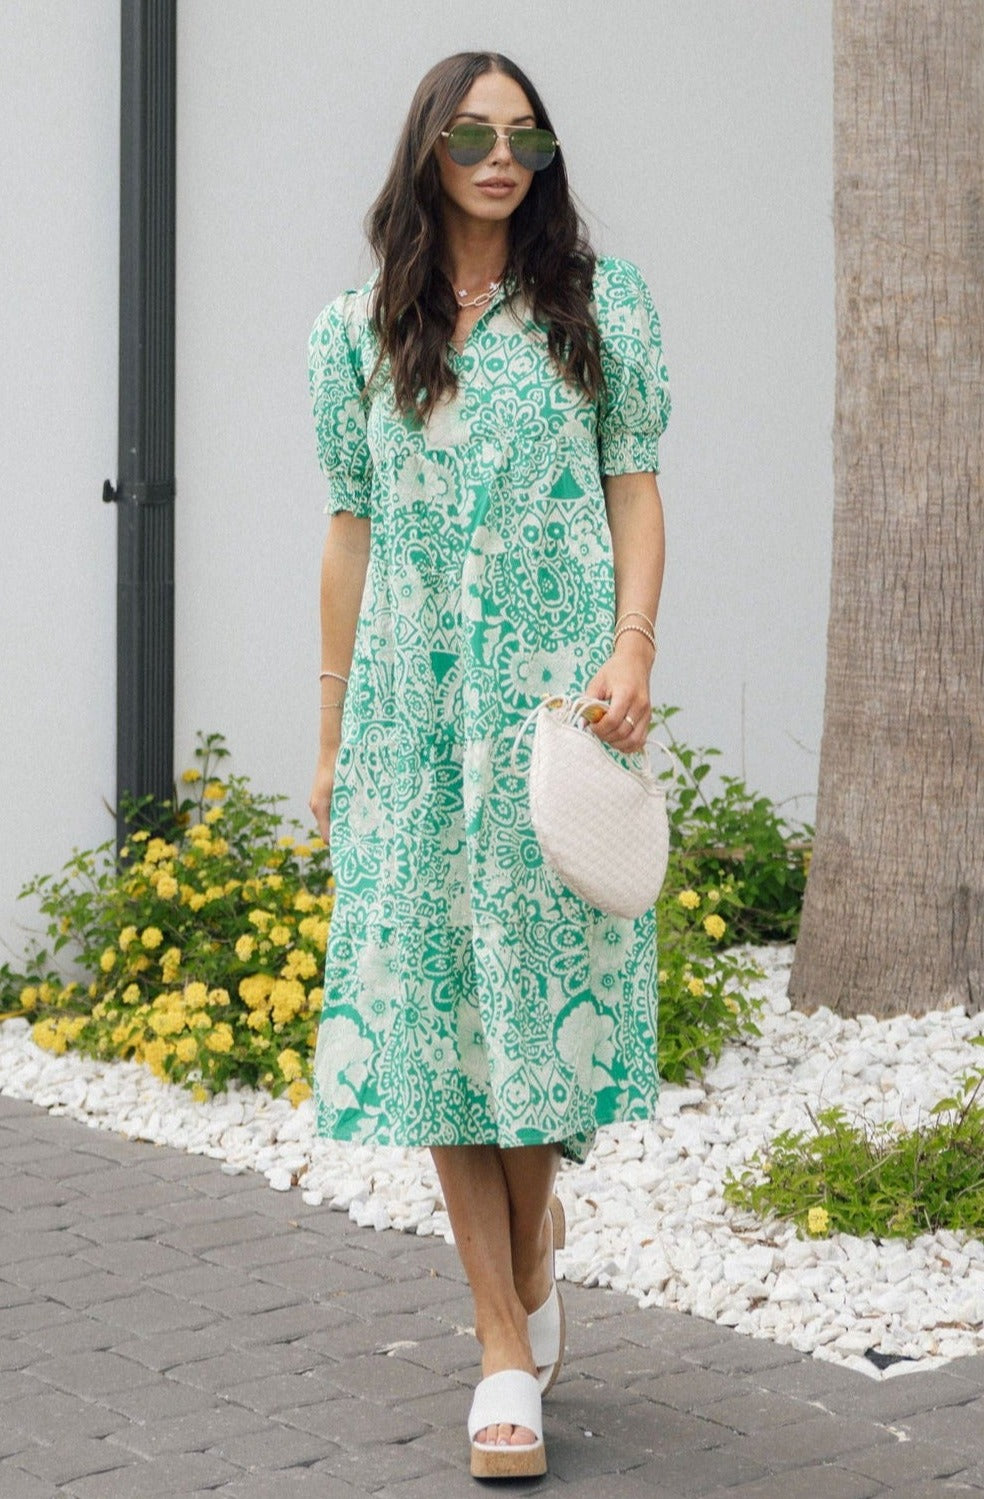 Full body view of female model wearing the Celeste Green & Cream Floral Paisley Midi Dress which features Green and Cream Floral Paisley Pattern, Midi Length, Tiered Body, V-Neckline with Collar and Short Puff Sleeves